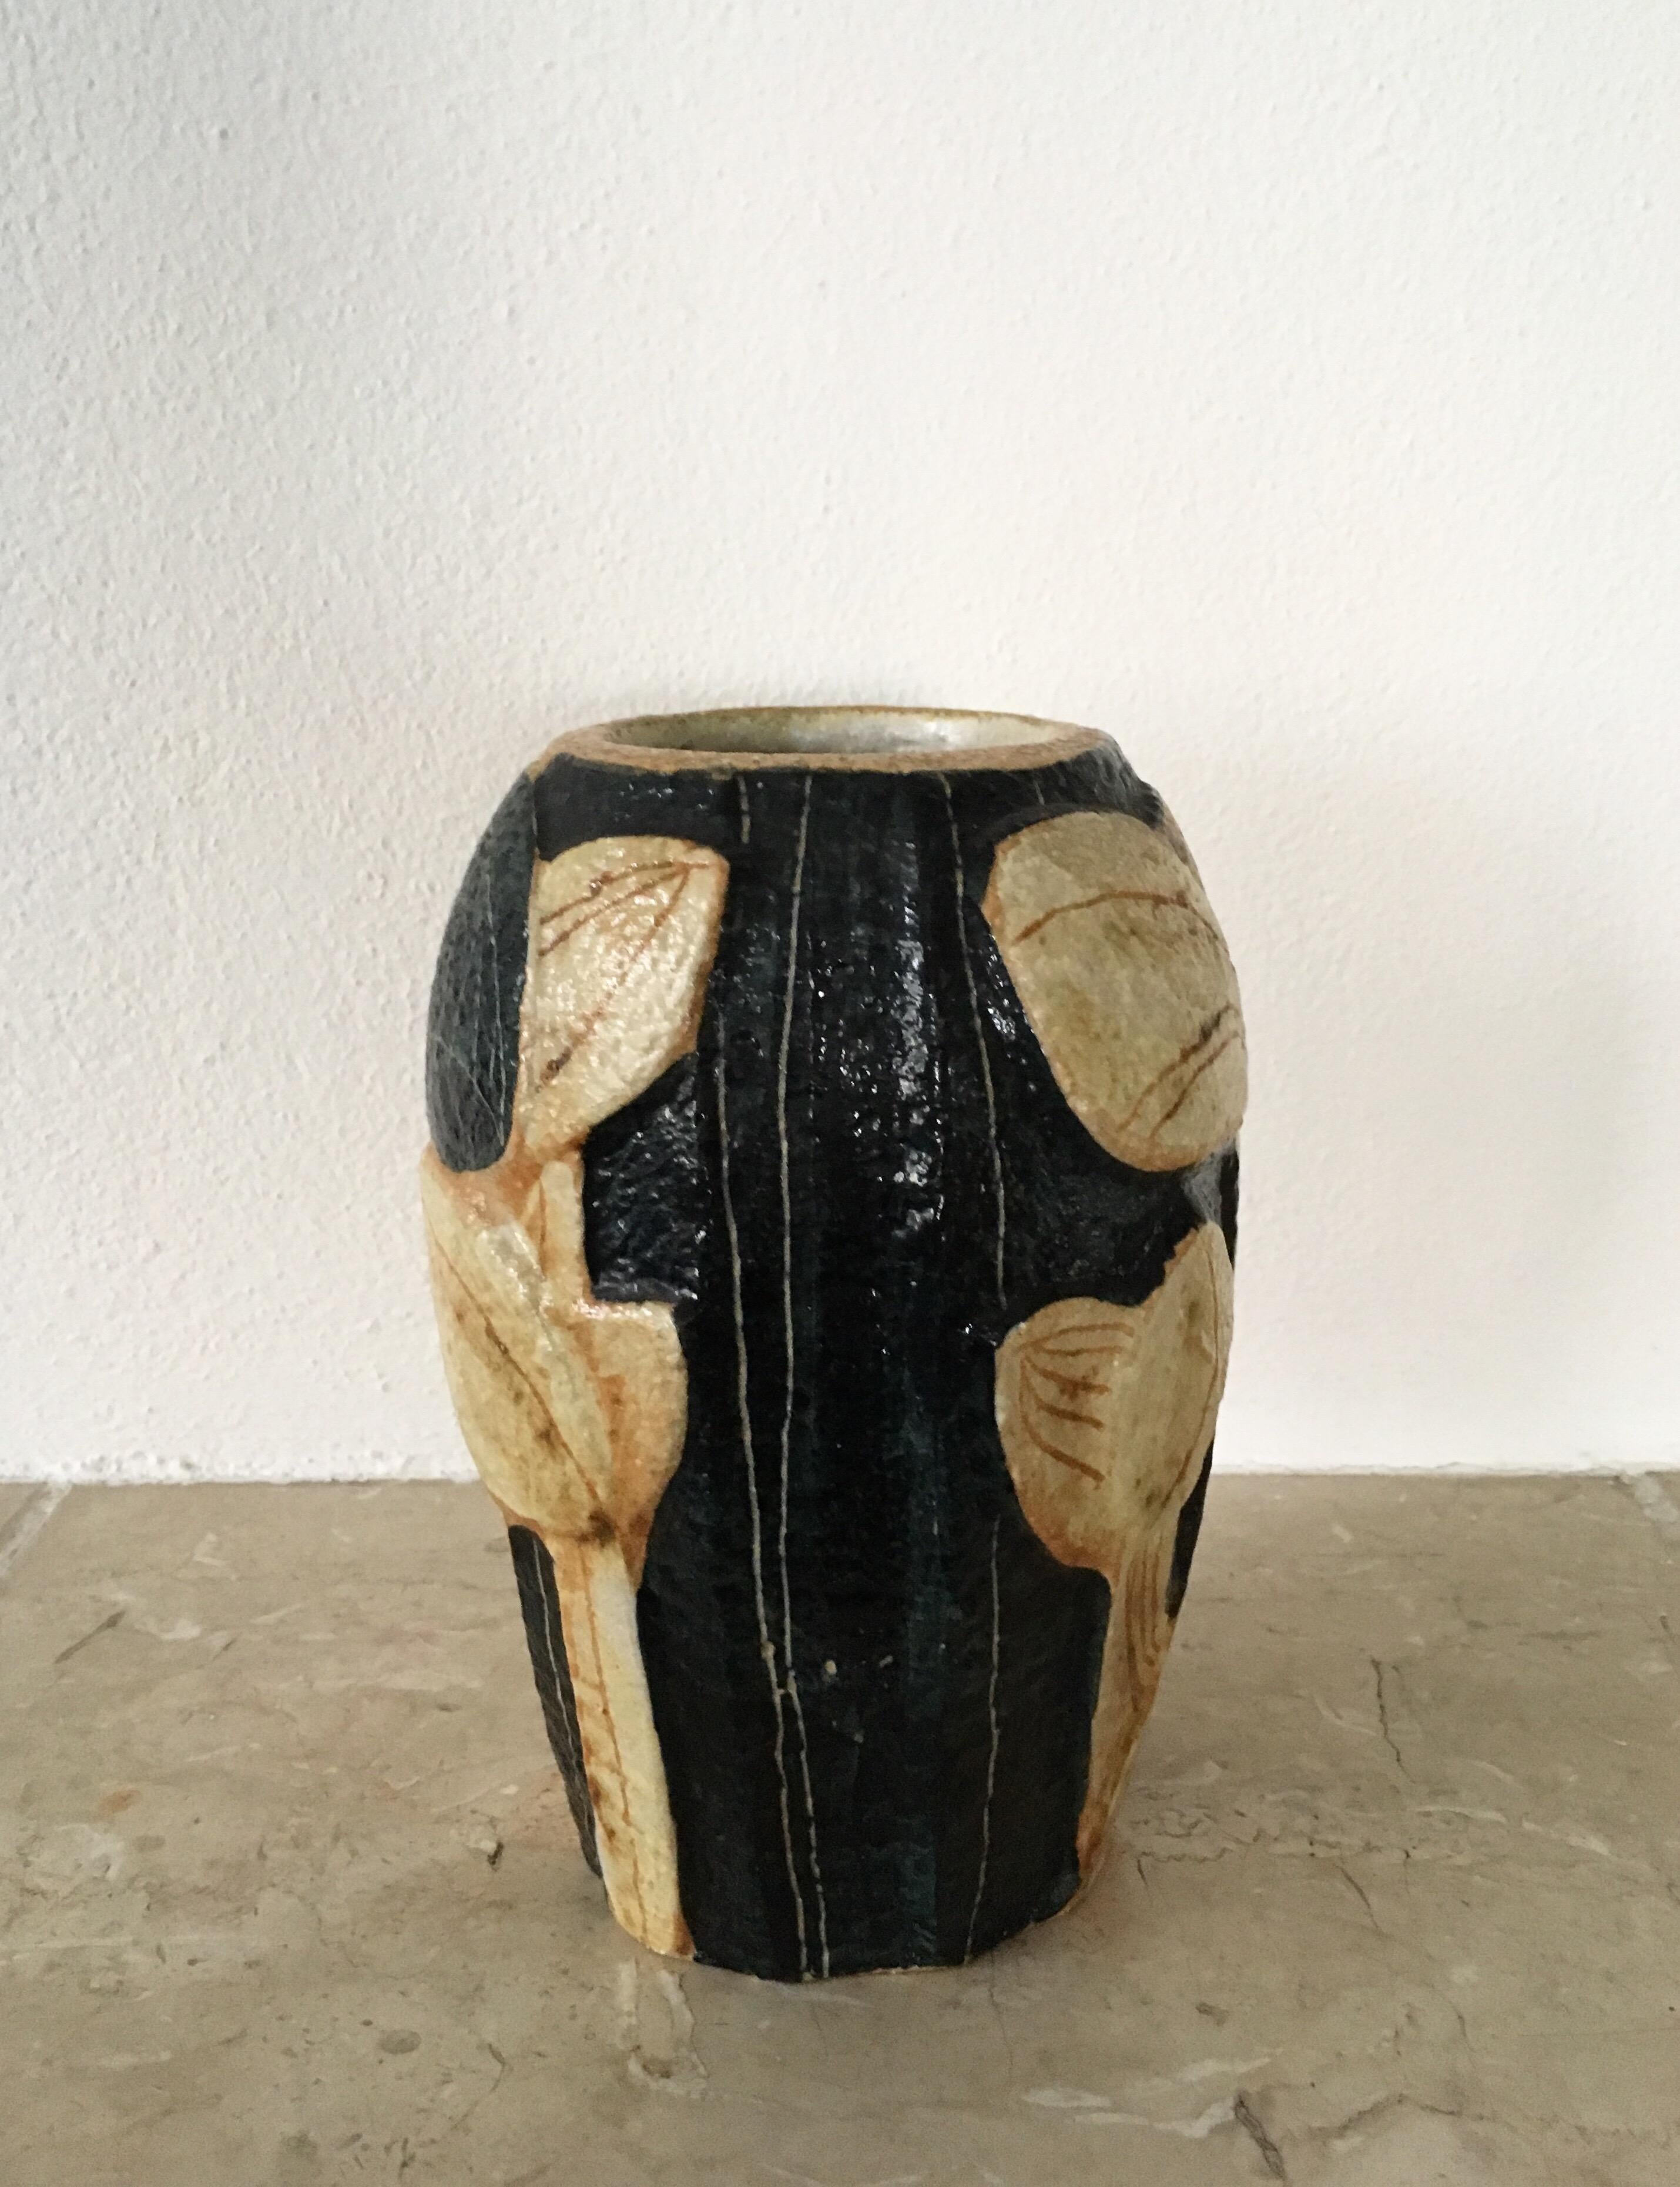 Stunning and rarely seen Scandinavian Mid-Century Modern handmade stoneware vase by Noomi Backhausen for Danish Søholm Stentøj. Hand painted in basic colors. Signed. Very good vintage condition. NOW TEMPORARY DISCOUNT PROMO CODE AVAILABLE, SEND